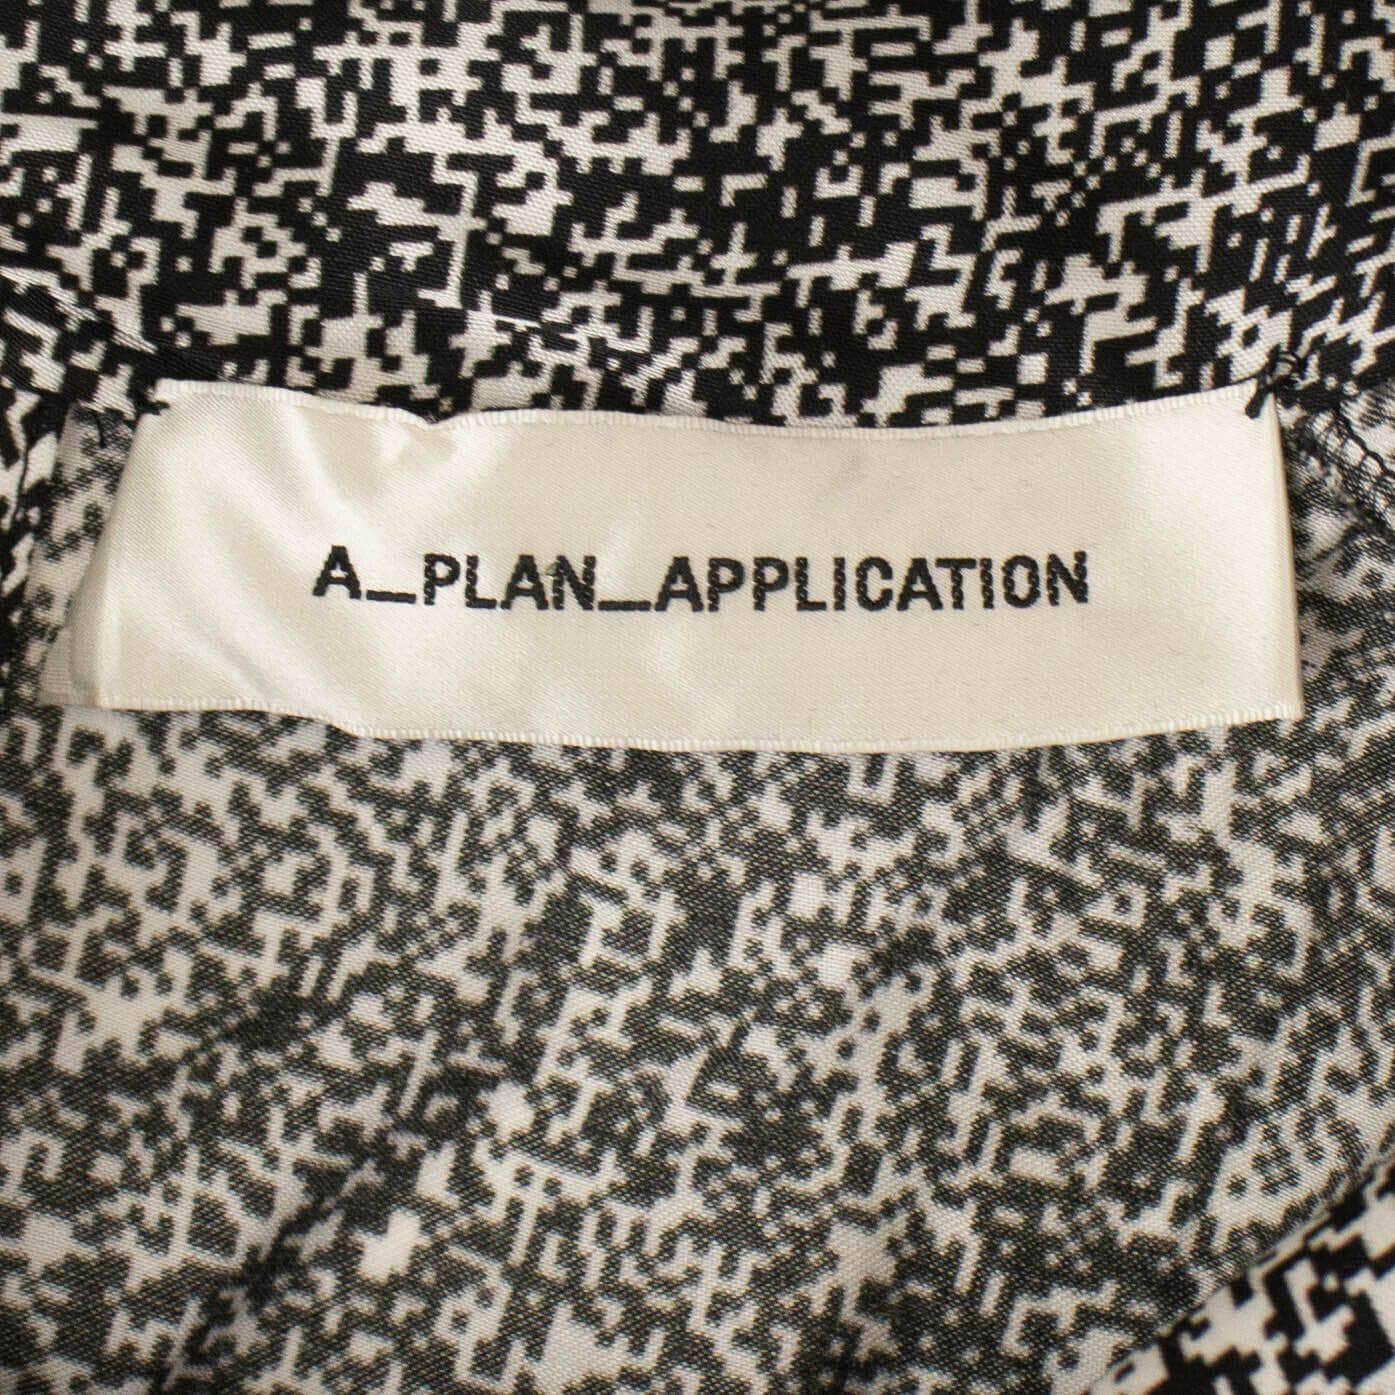 A_PLAN_APPLICATION 250-500, a_plan_application, channelenable-all, couponcollection, gender-womens, main-clothing, size-s S / 82NGG-AP-27/S Black/White Bow Mini Dress 82NGG-AP-27/S 82NGG-AP-27/S